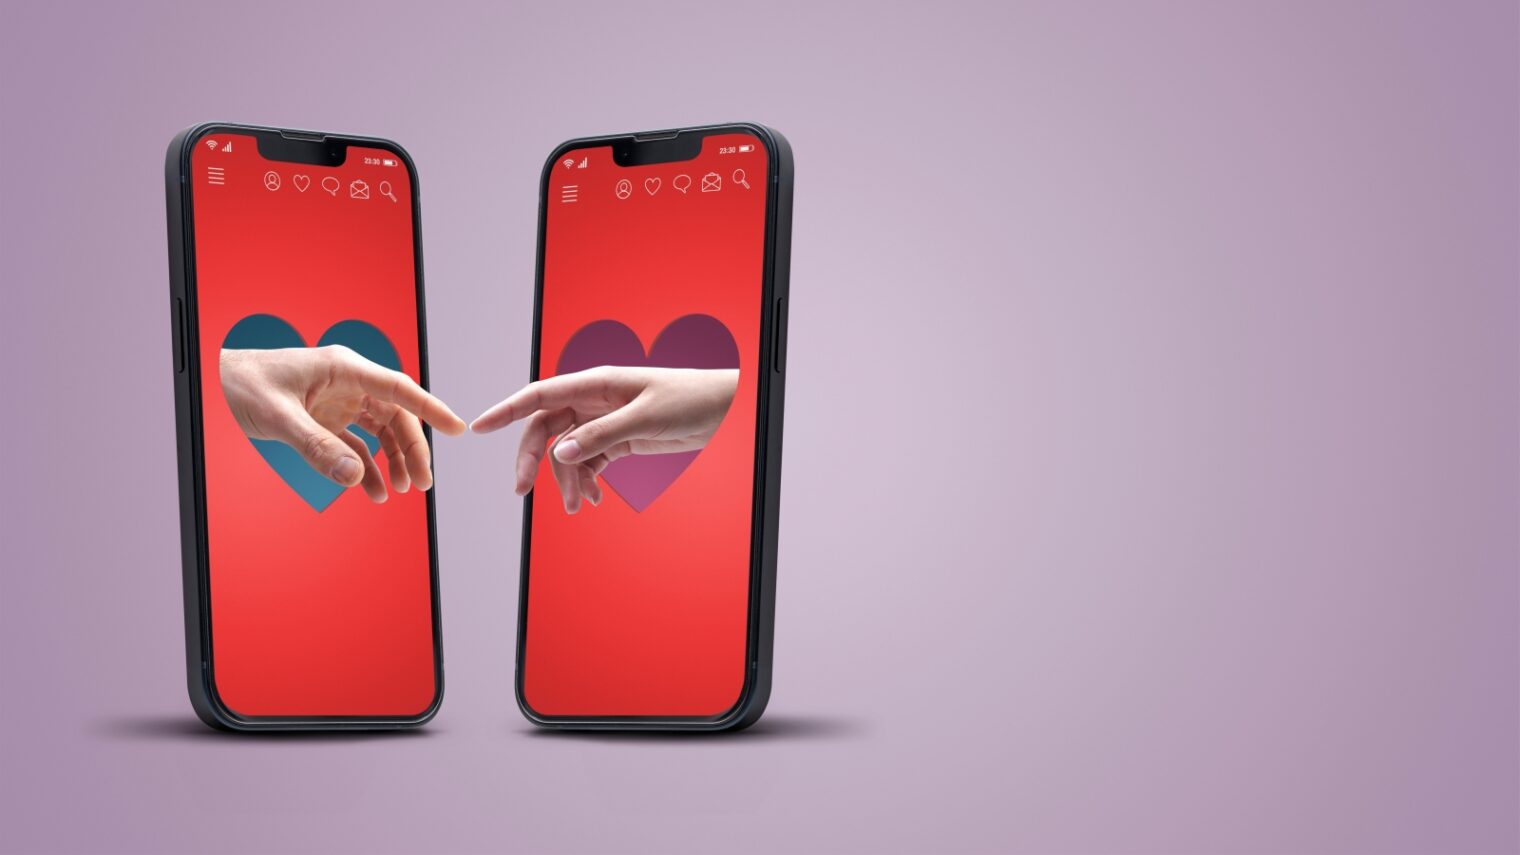 A dating app that uses AI for personalized matchmaking. Photo illustration by Stokkete via Shutterstock.com